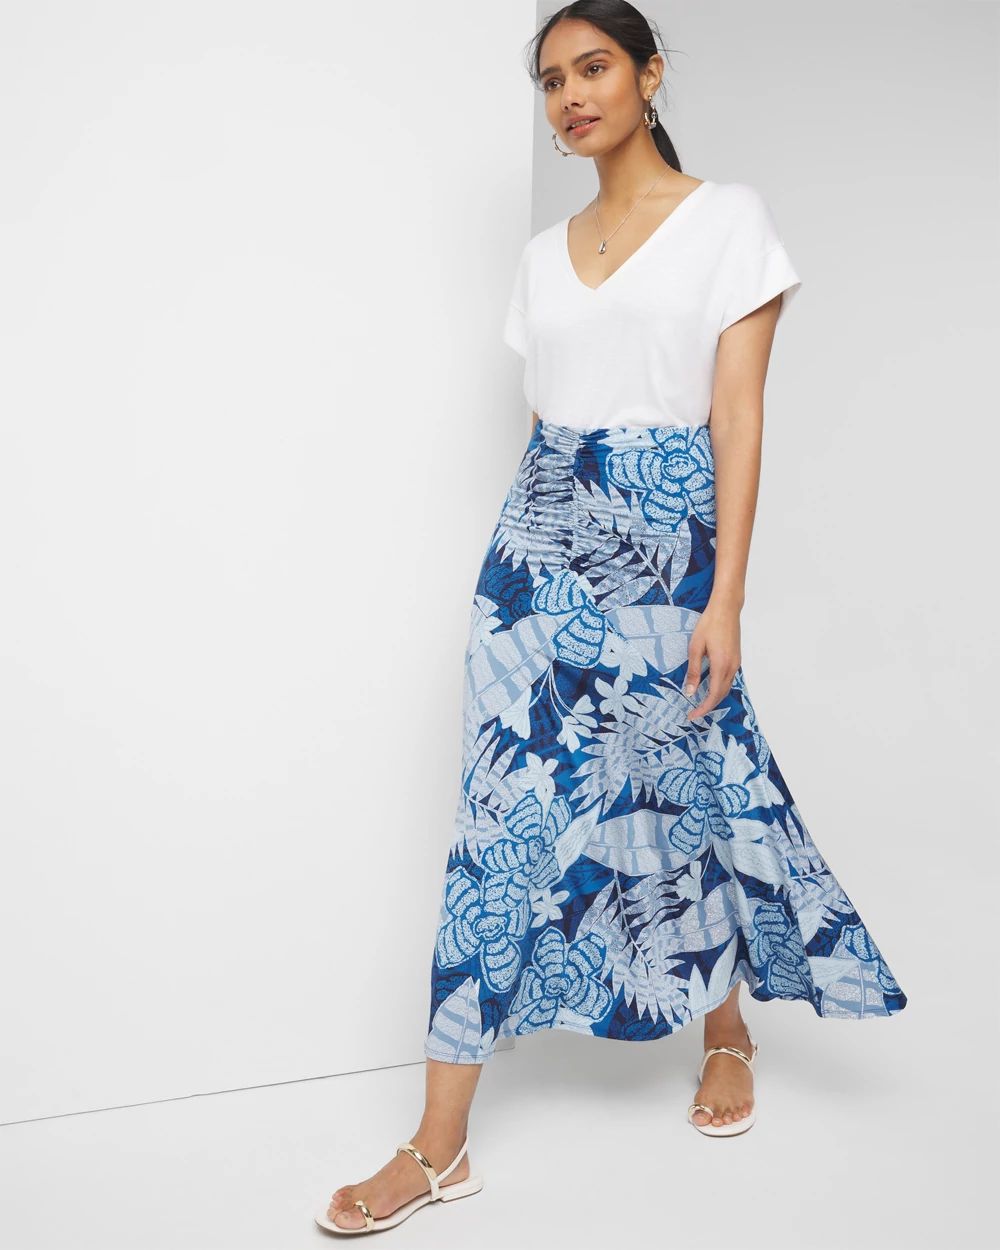 Ruched Front Maxi Skirt click to view larger image.